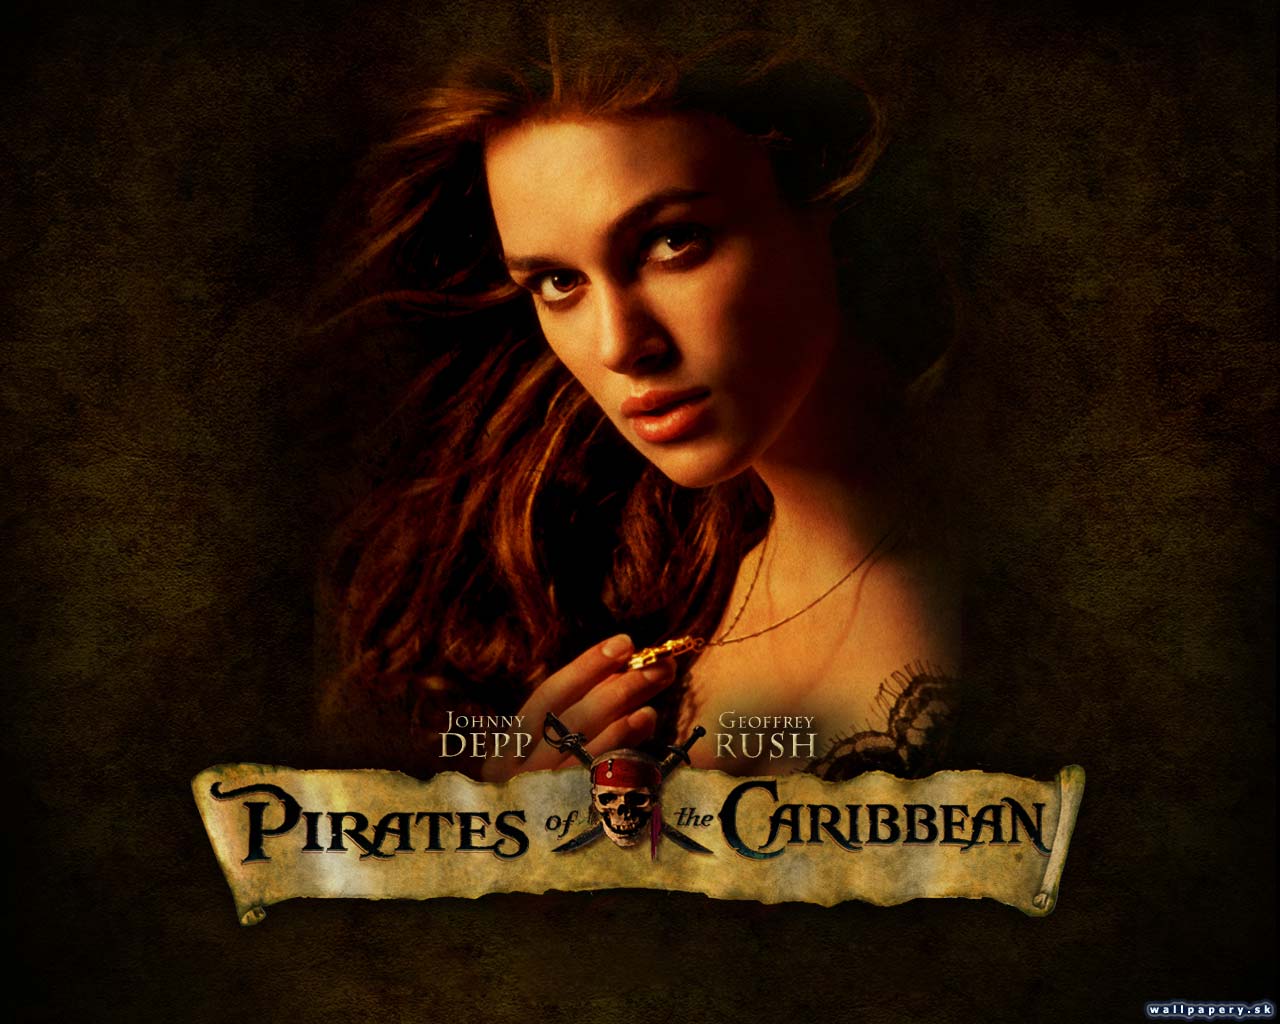 Pirates of the Caribbean - wallpaper 2